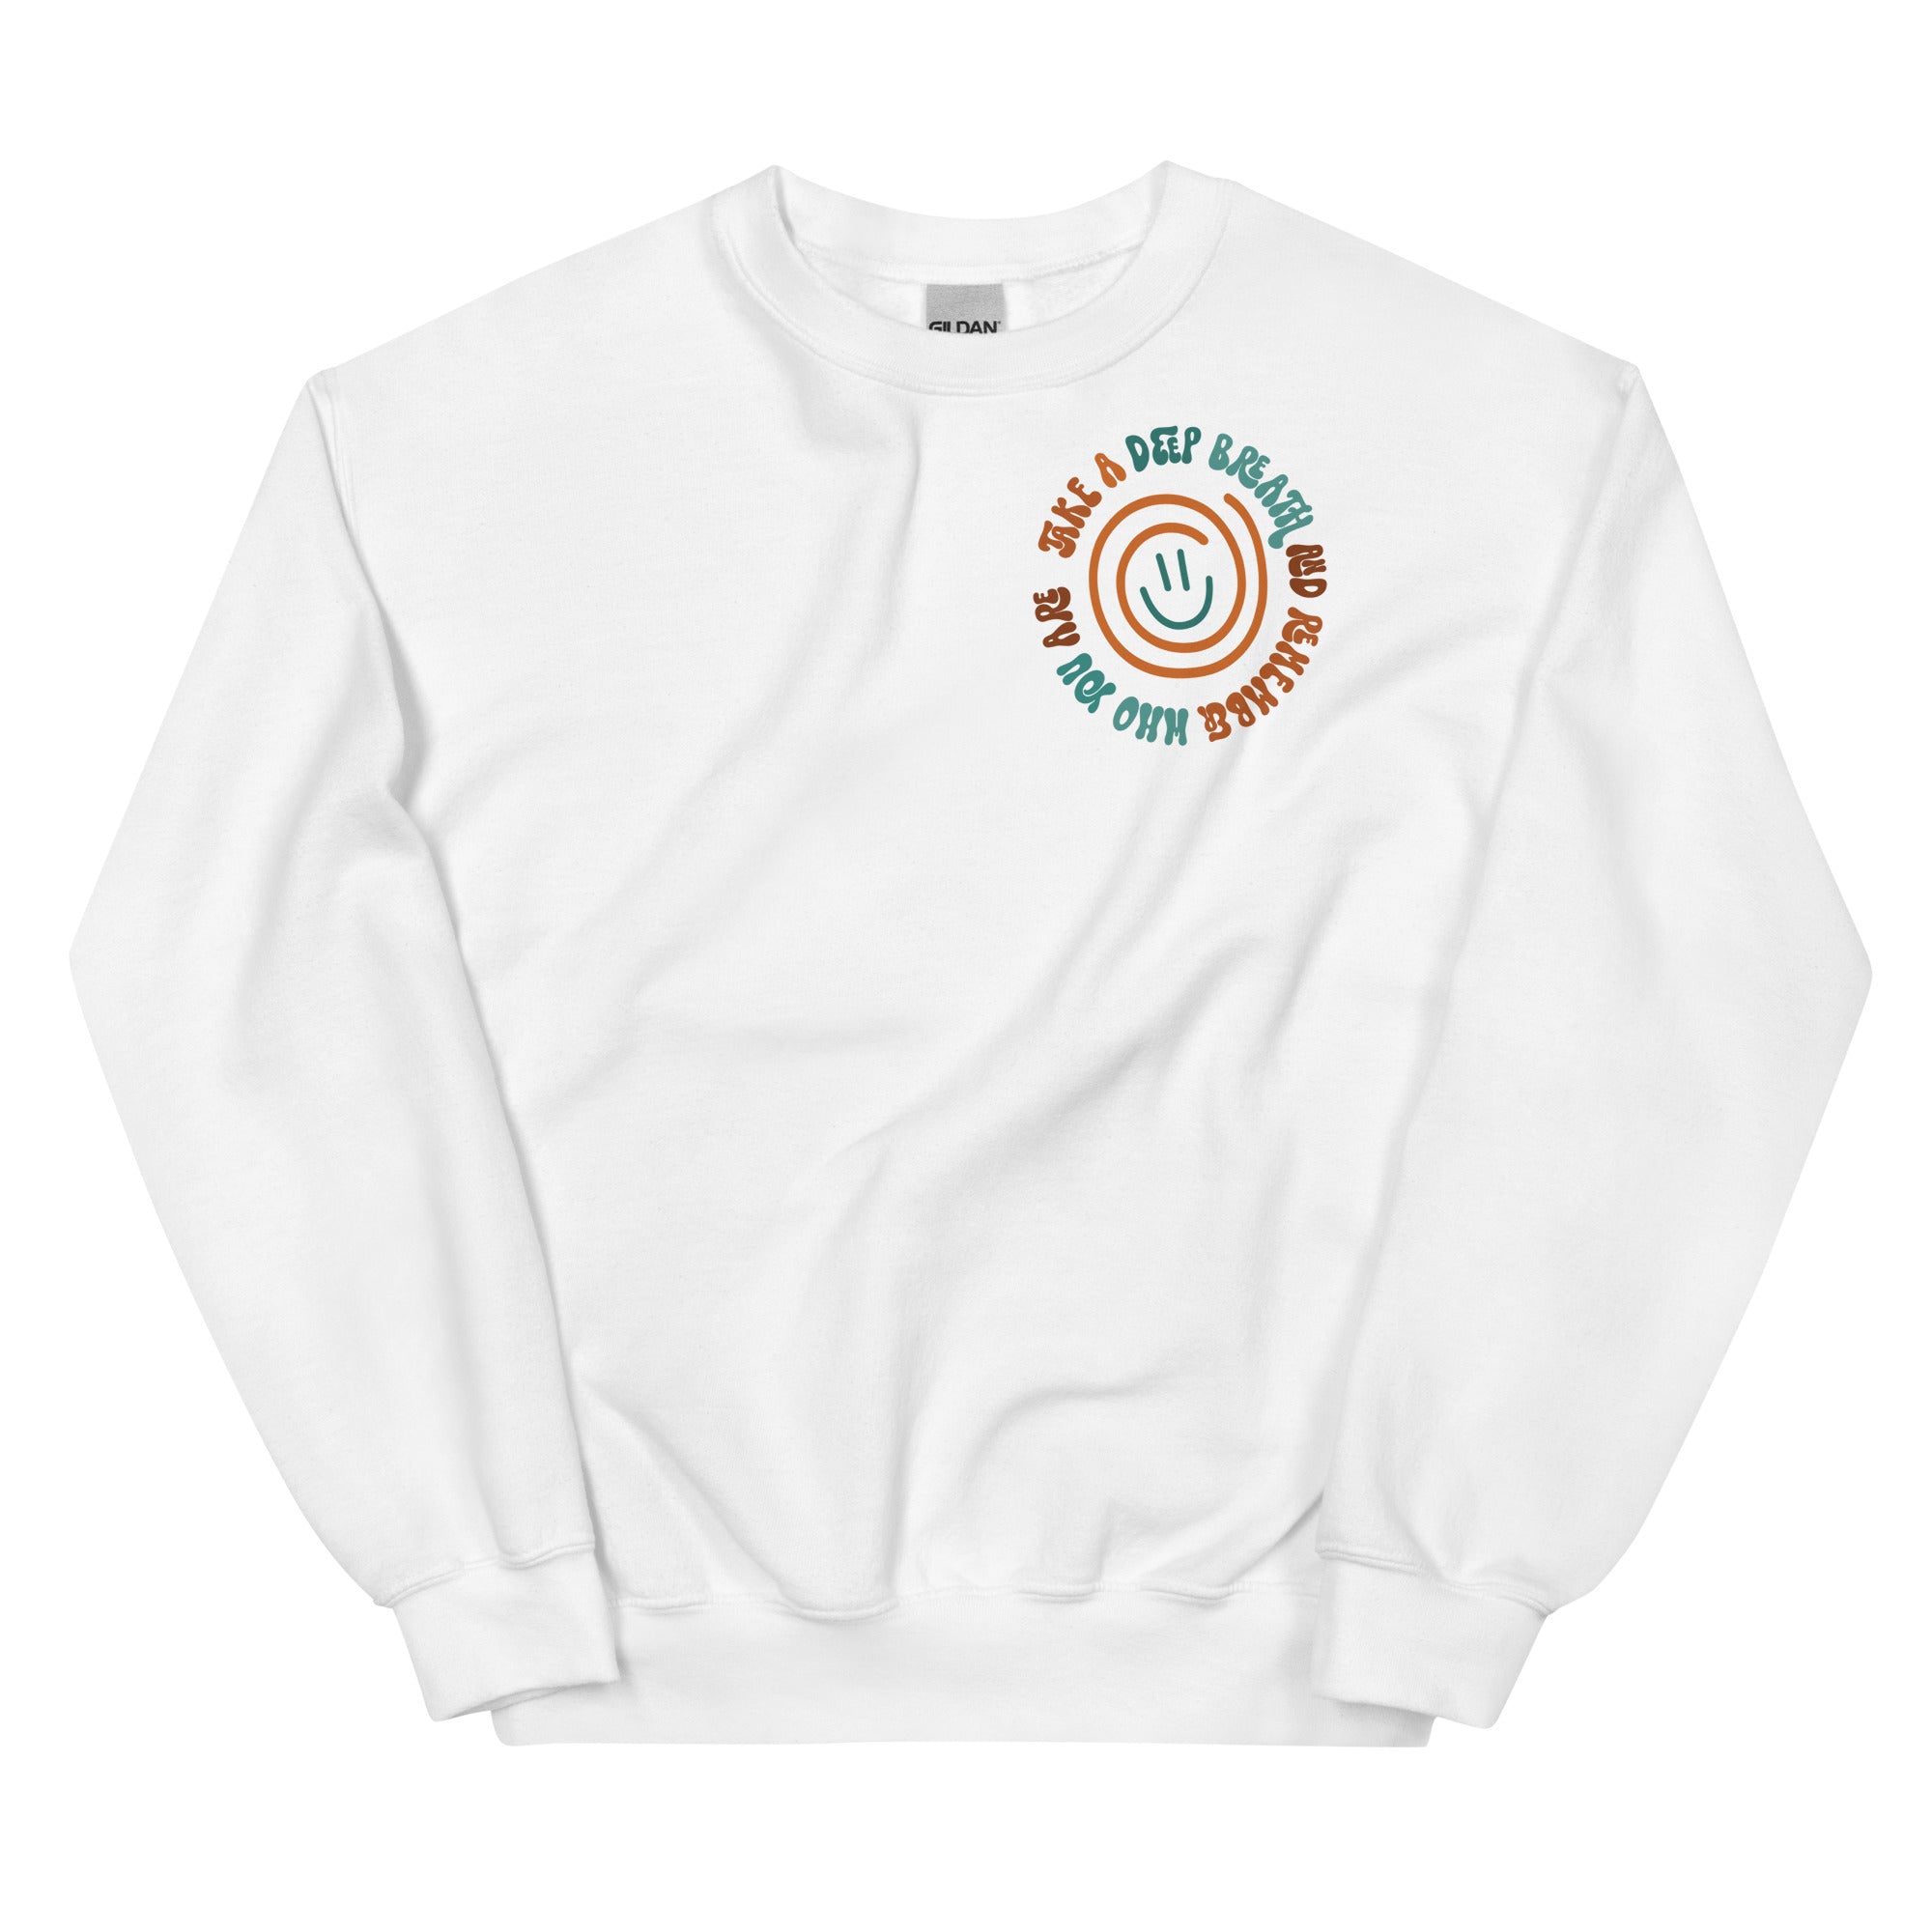 Remember Who You Are Sweatshirt